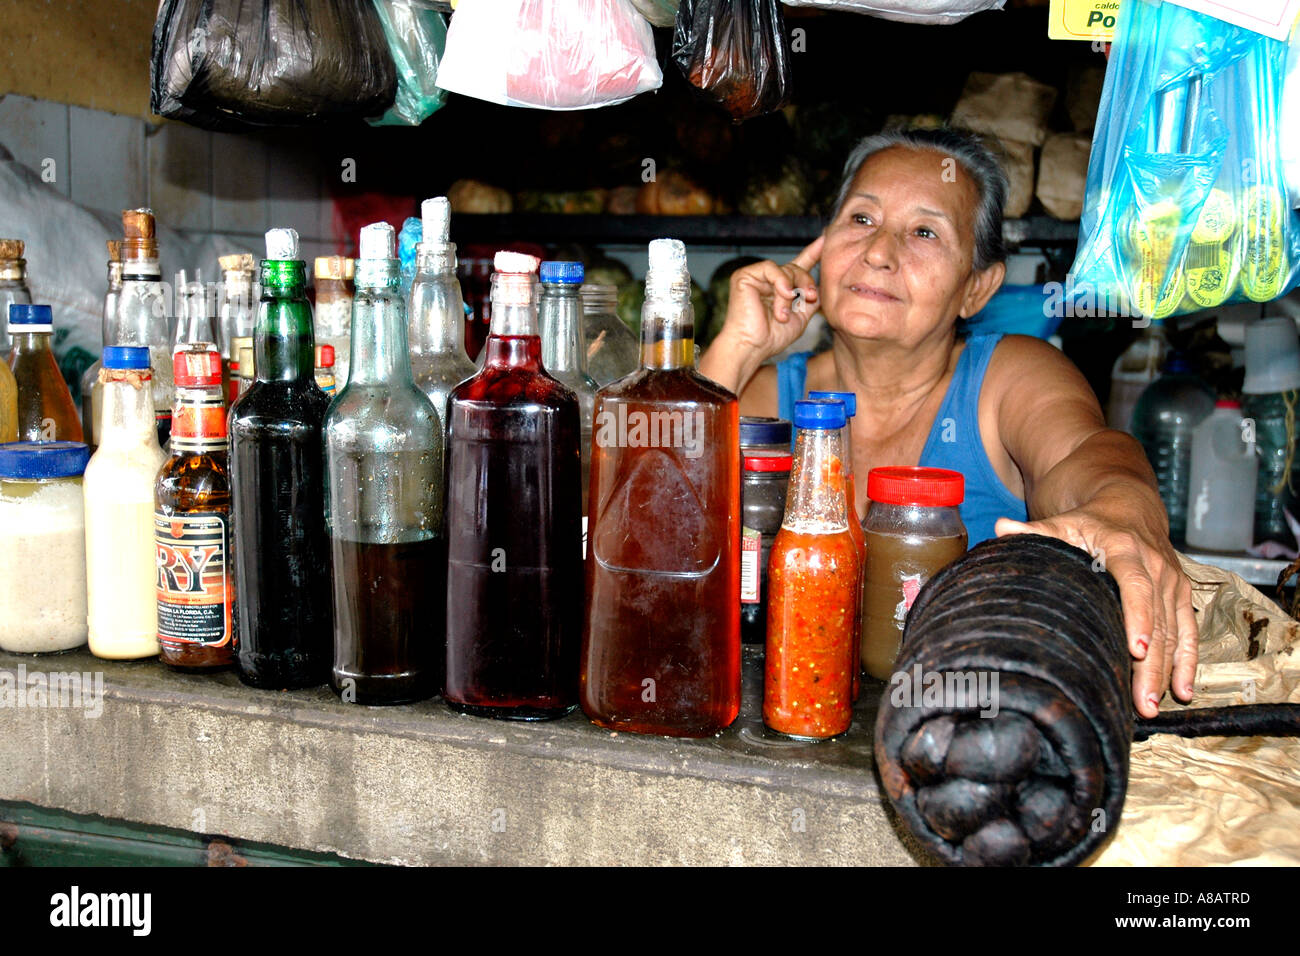 In a market stall in Venezuela's Ciudad Bolivar a woman displays cooking oils and a big black lump of chewing tobacco Stock Photo